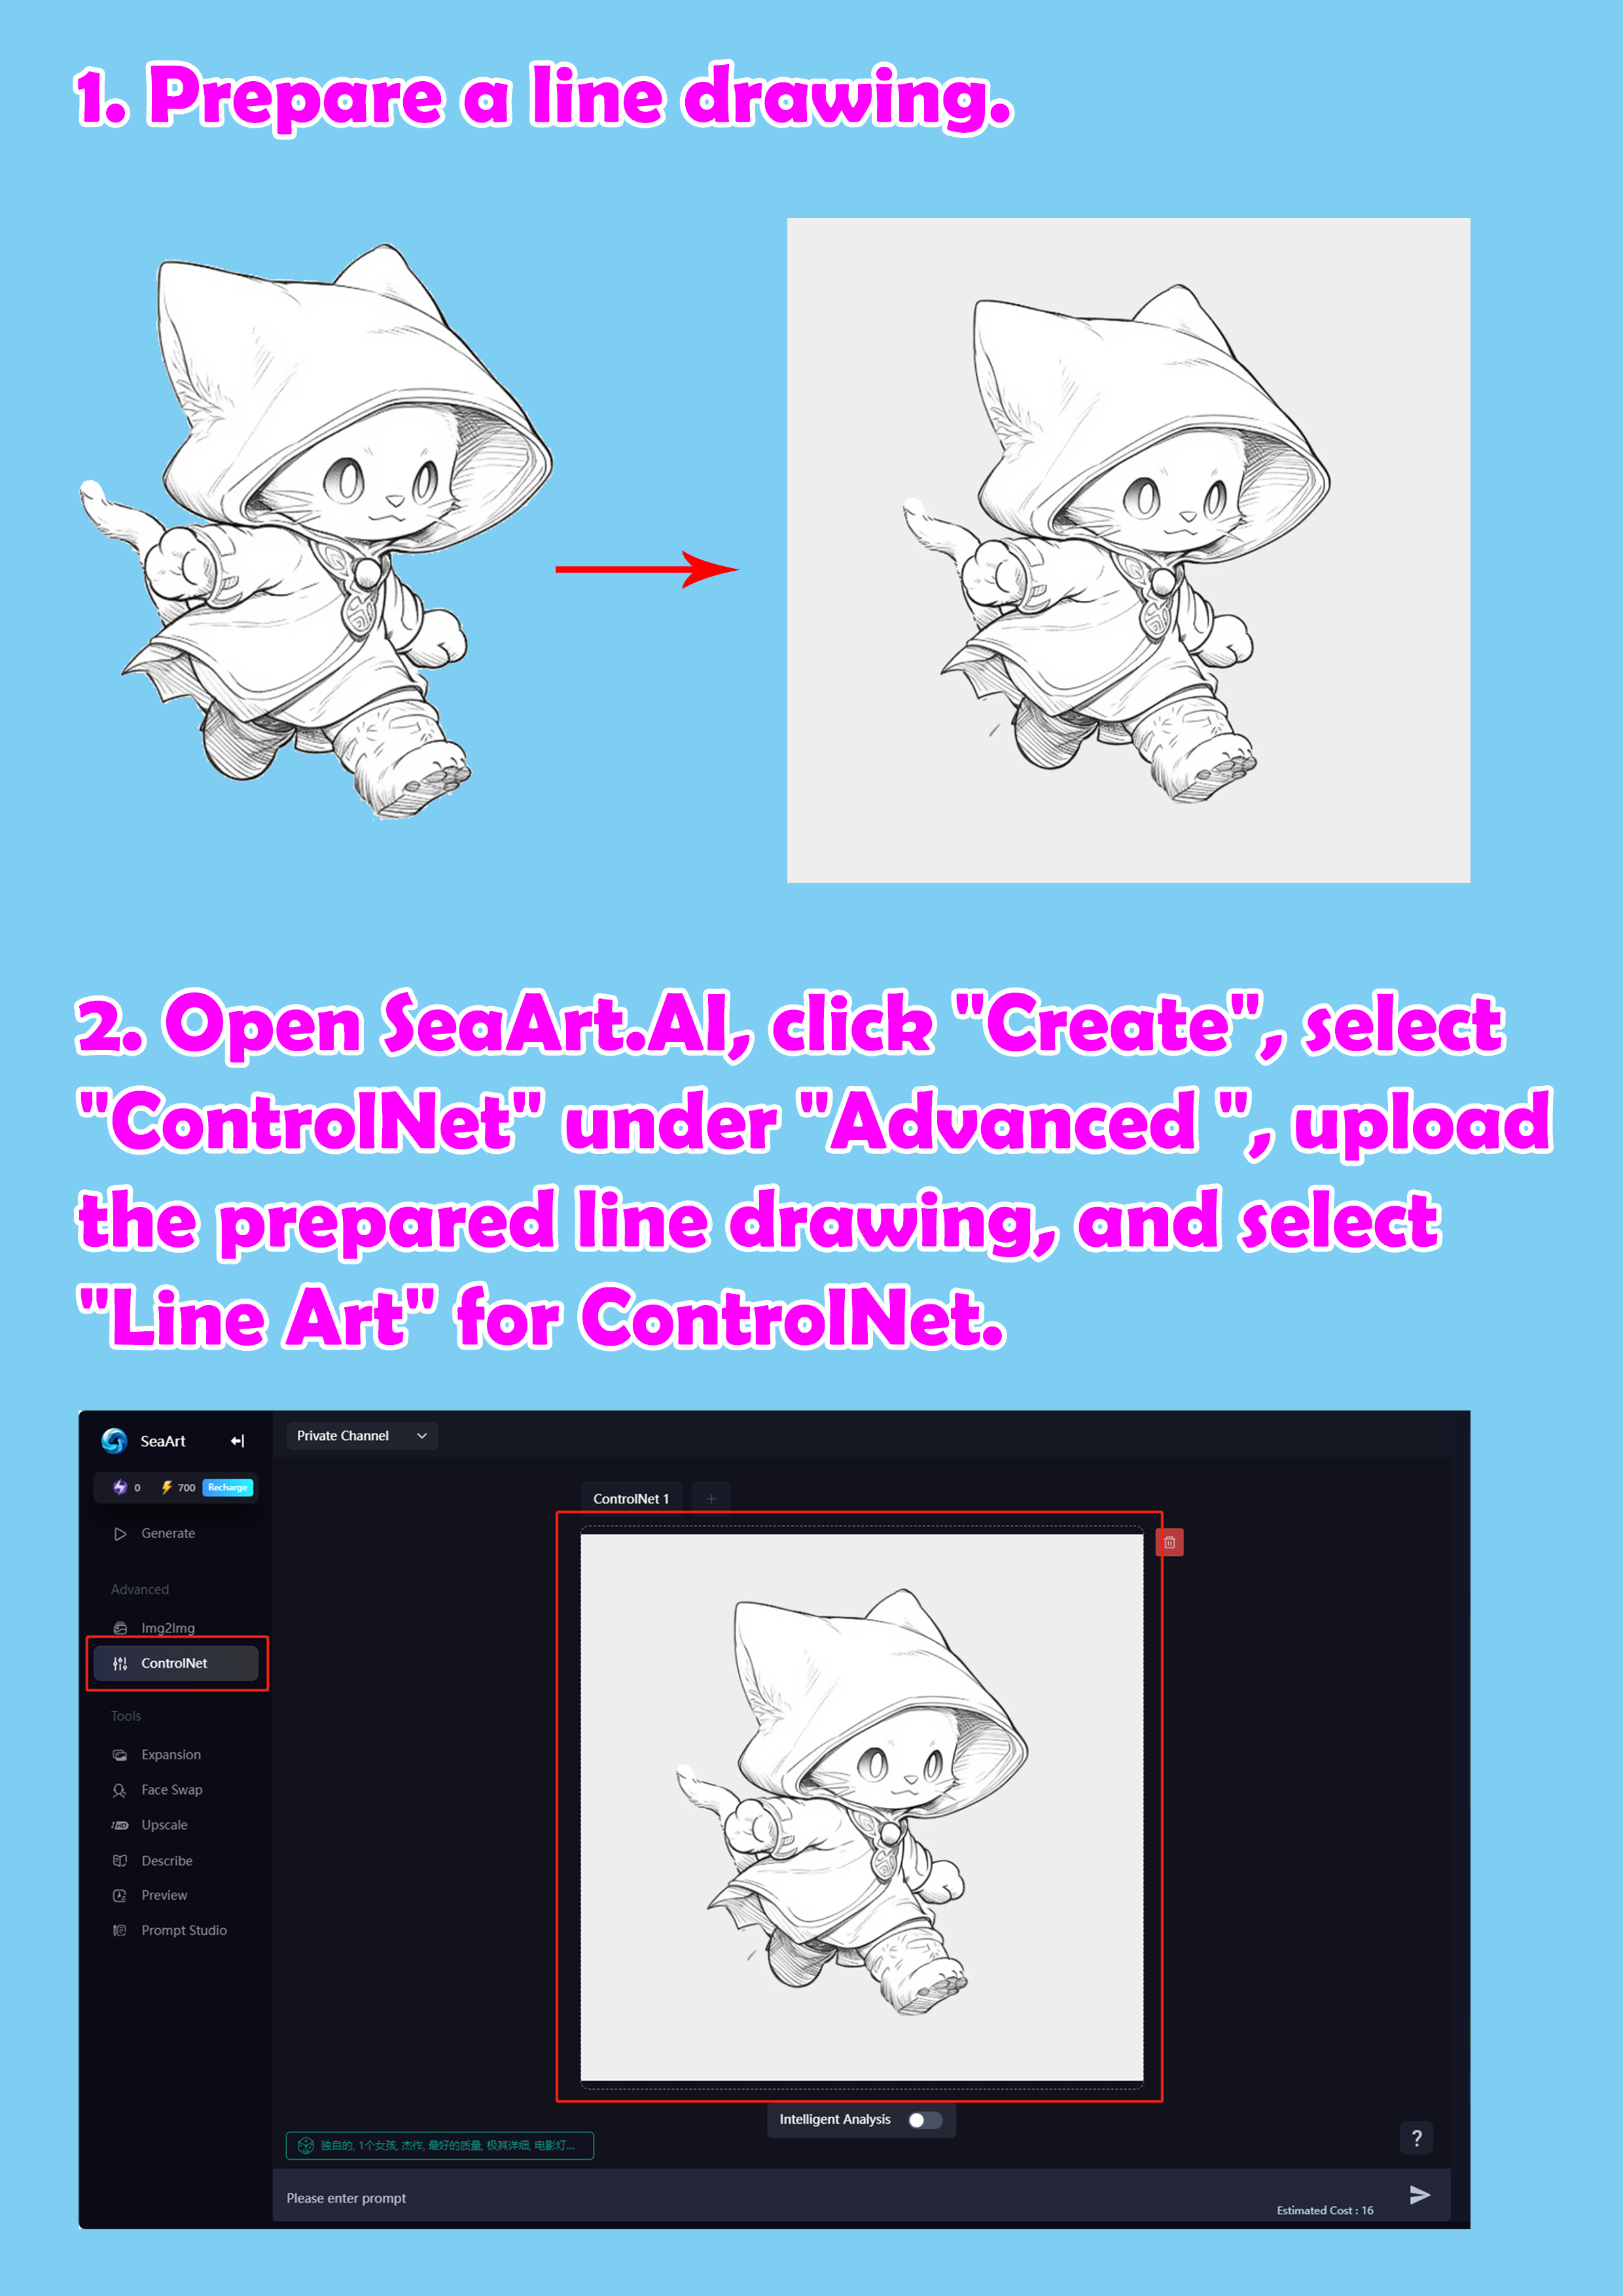 Tutorial on Converting Line Drawings to 3D Models